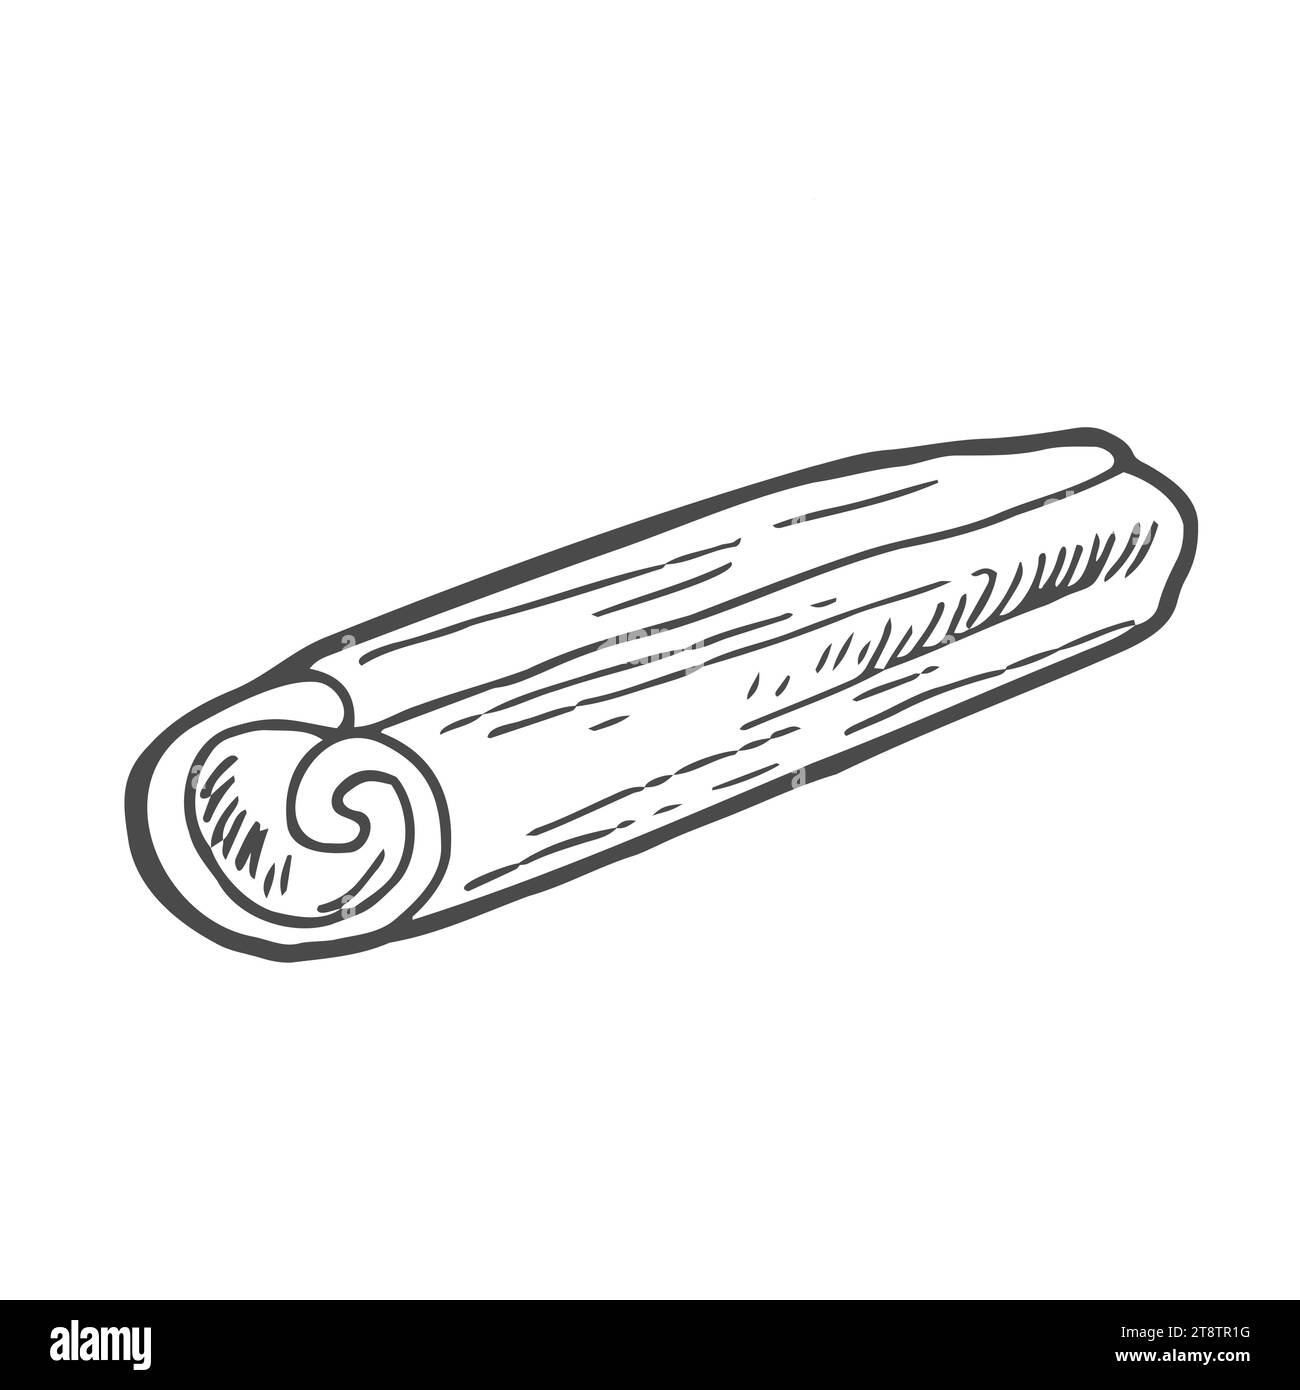 Cinnamon sticks in hand drawn doodle style. Cinnamon pods sketch. Isolated Stock Vector